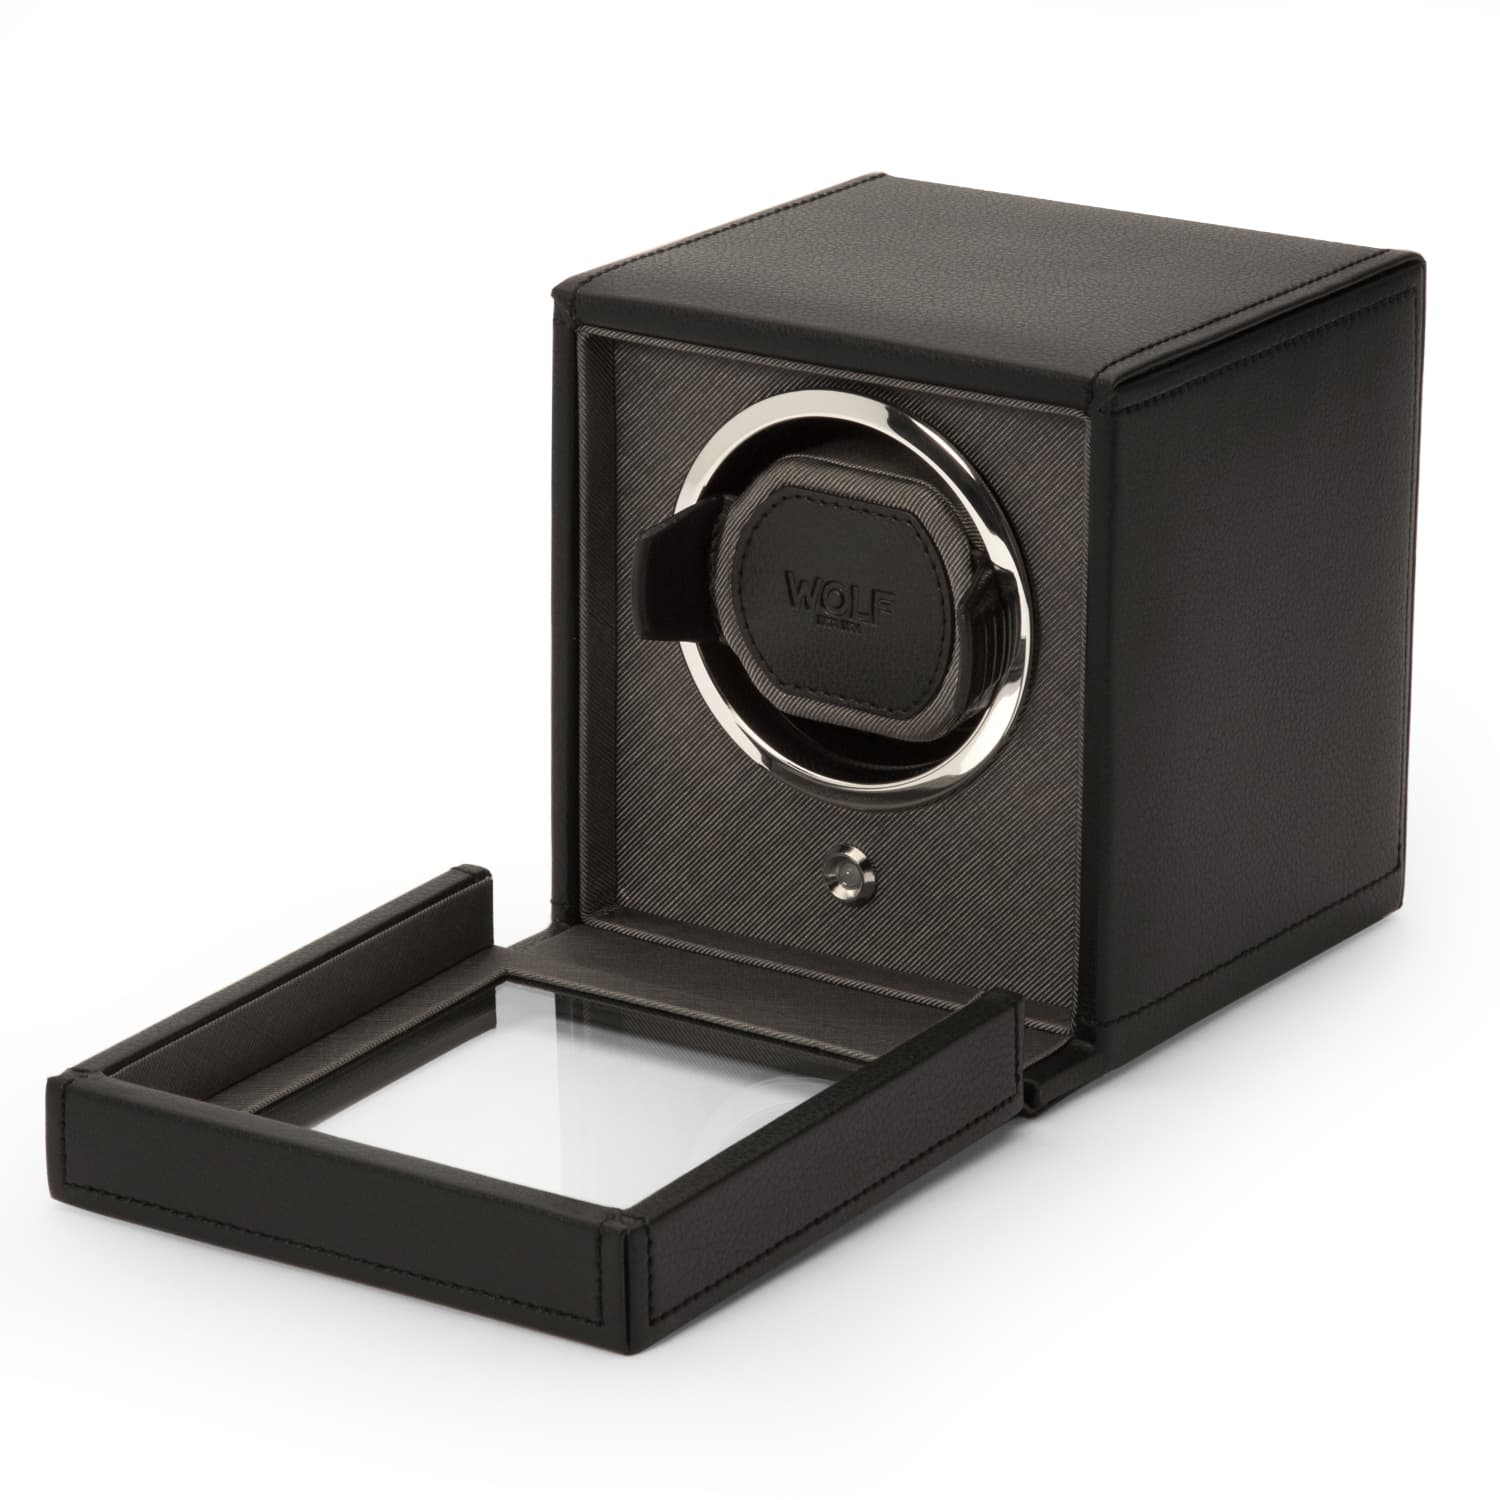 Wolf-Cub-Single-Watch-Winder-with-Cover-Black-461103-3